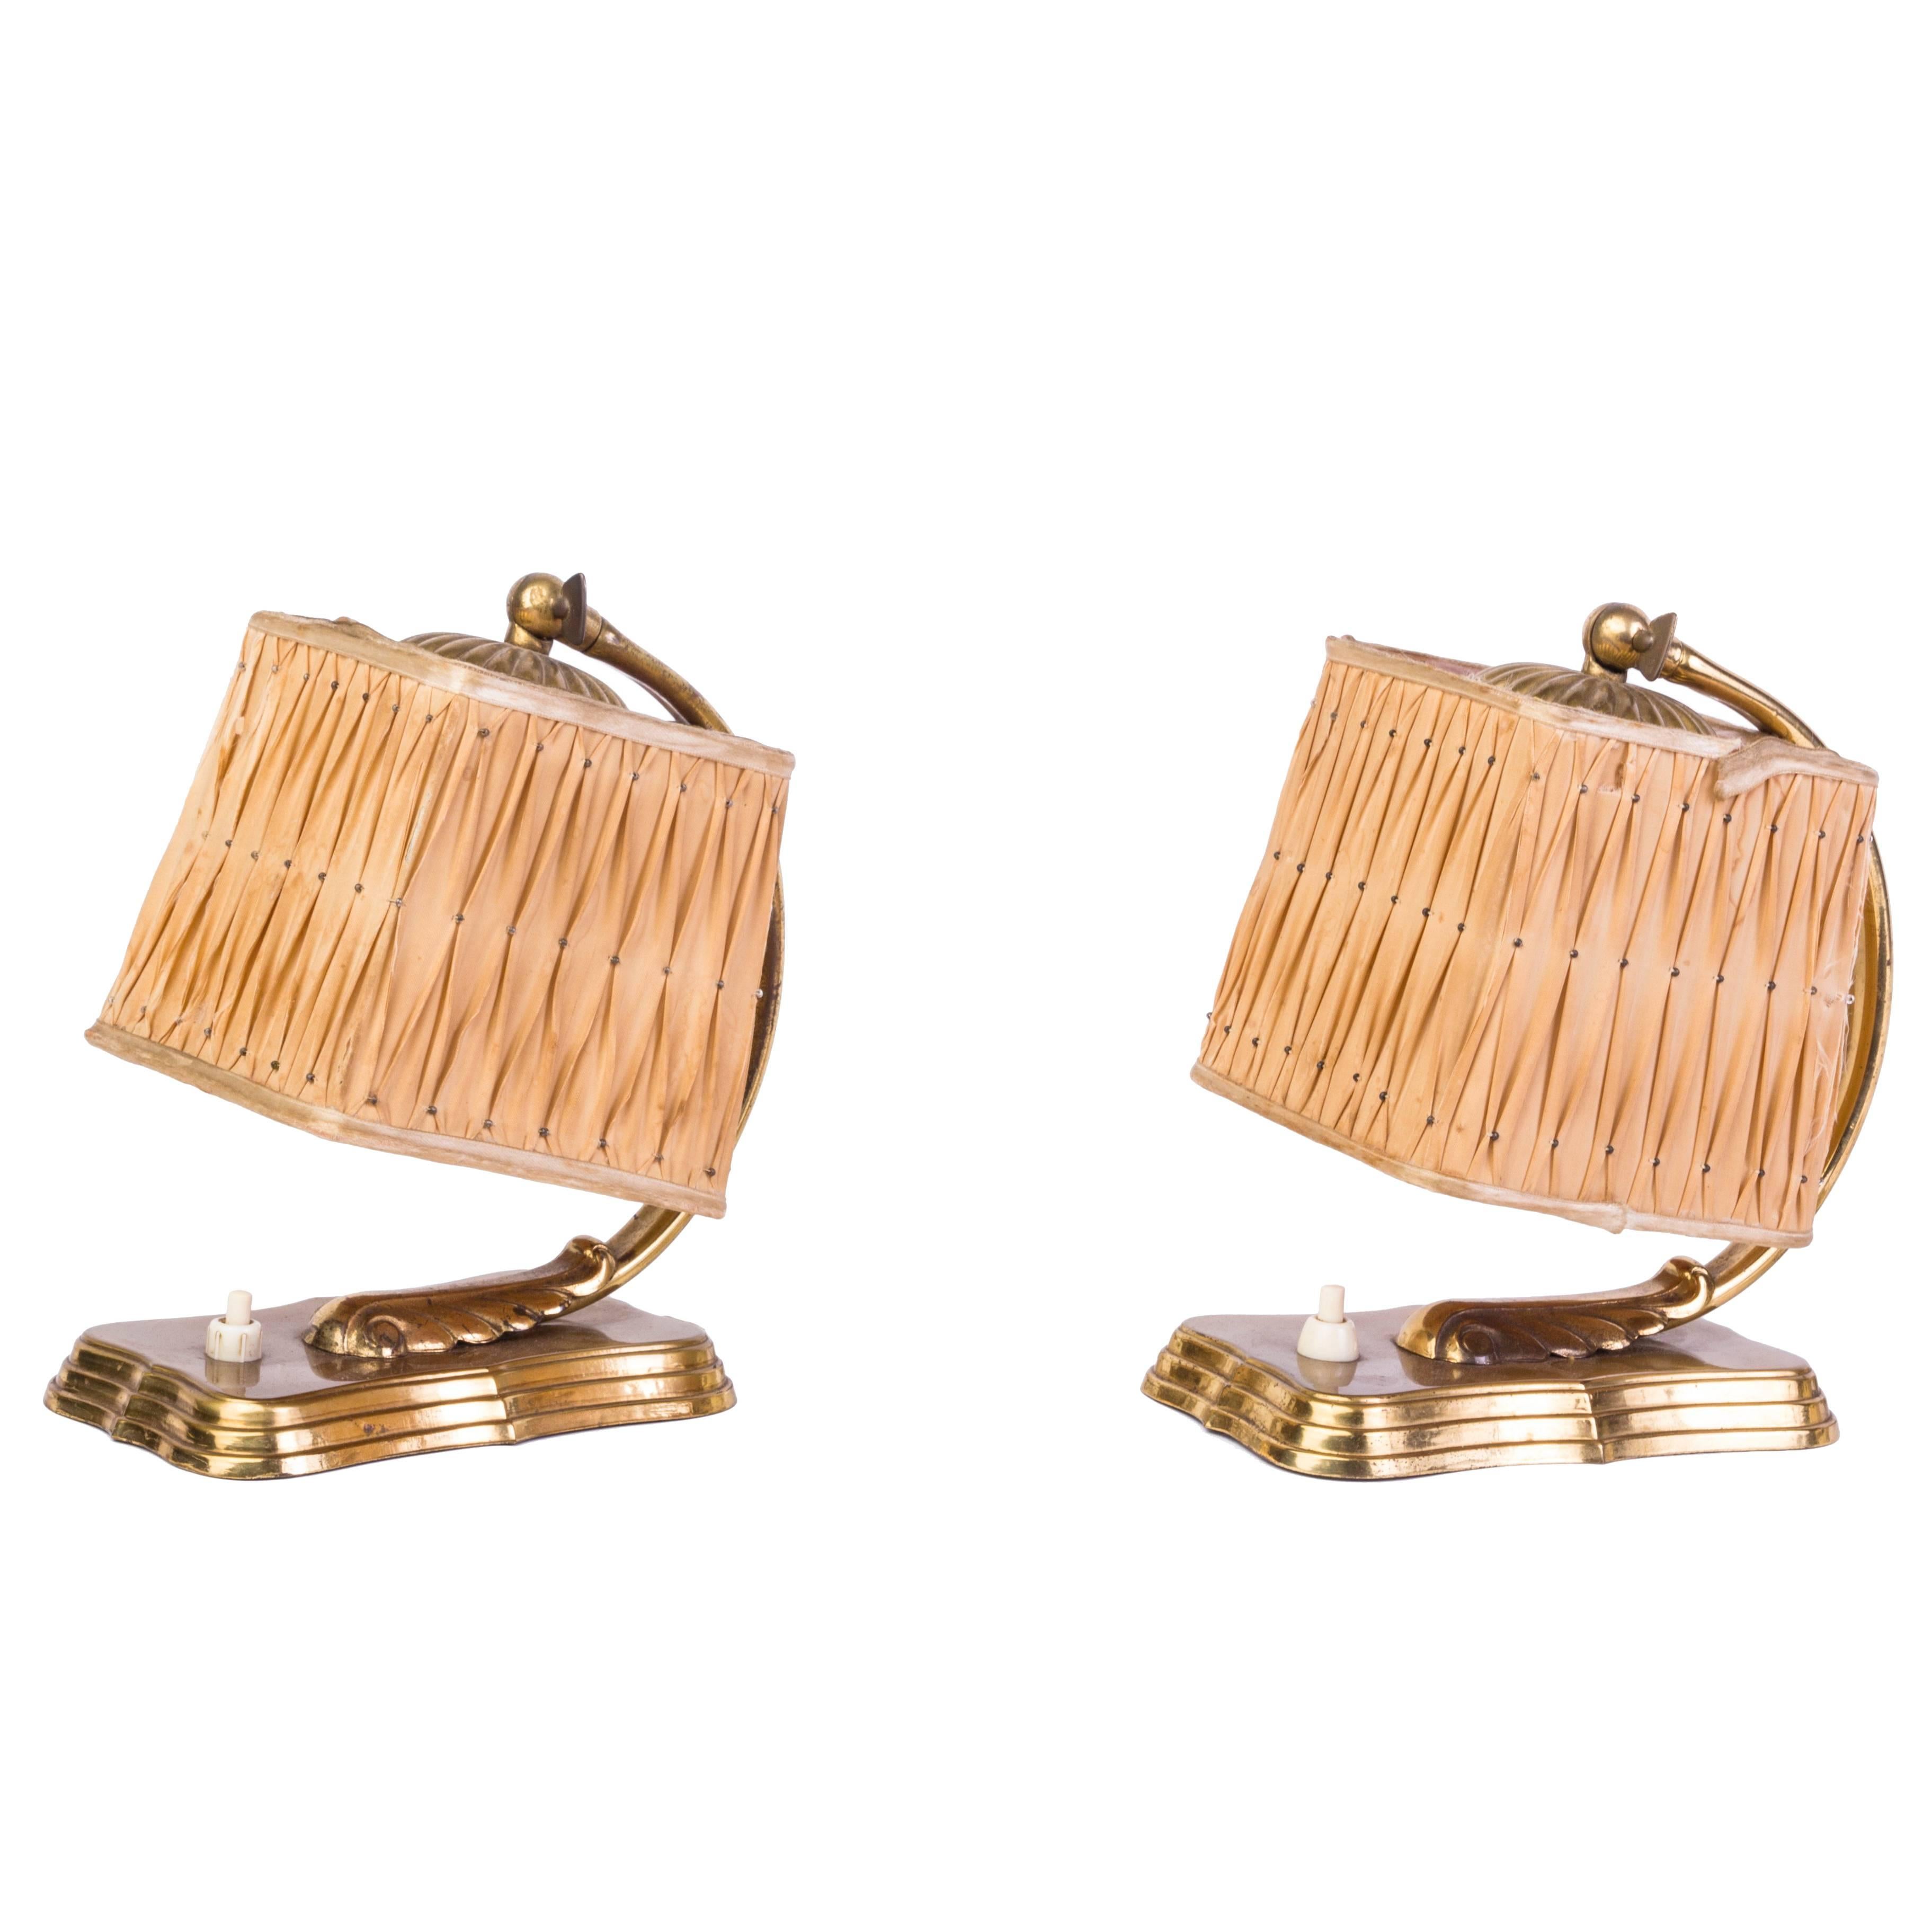 Gorgeous Pair of 1940s Silk and Brass Hollywood Regency Bedside Lamps